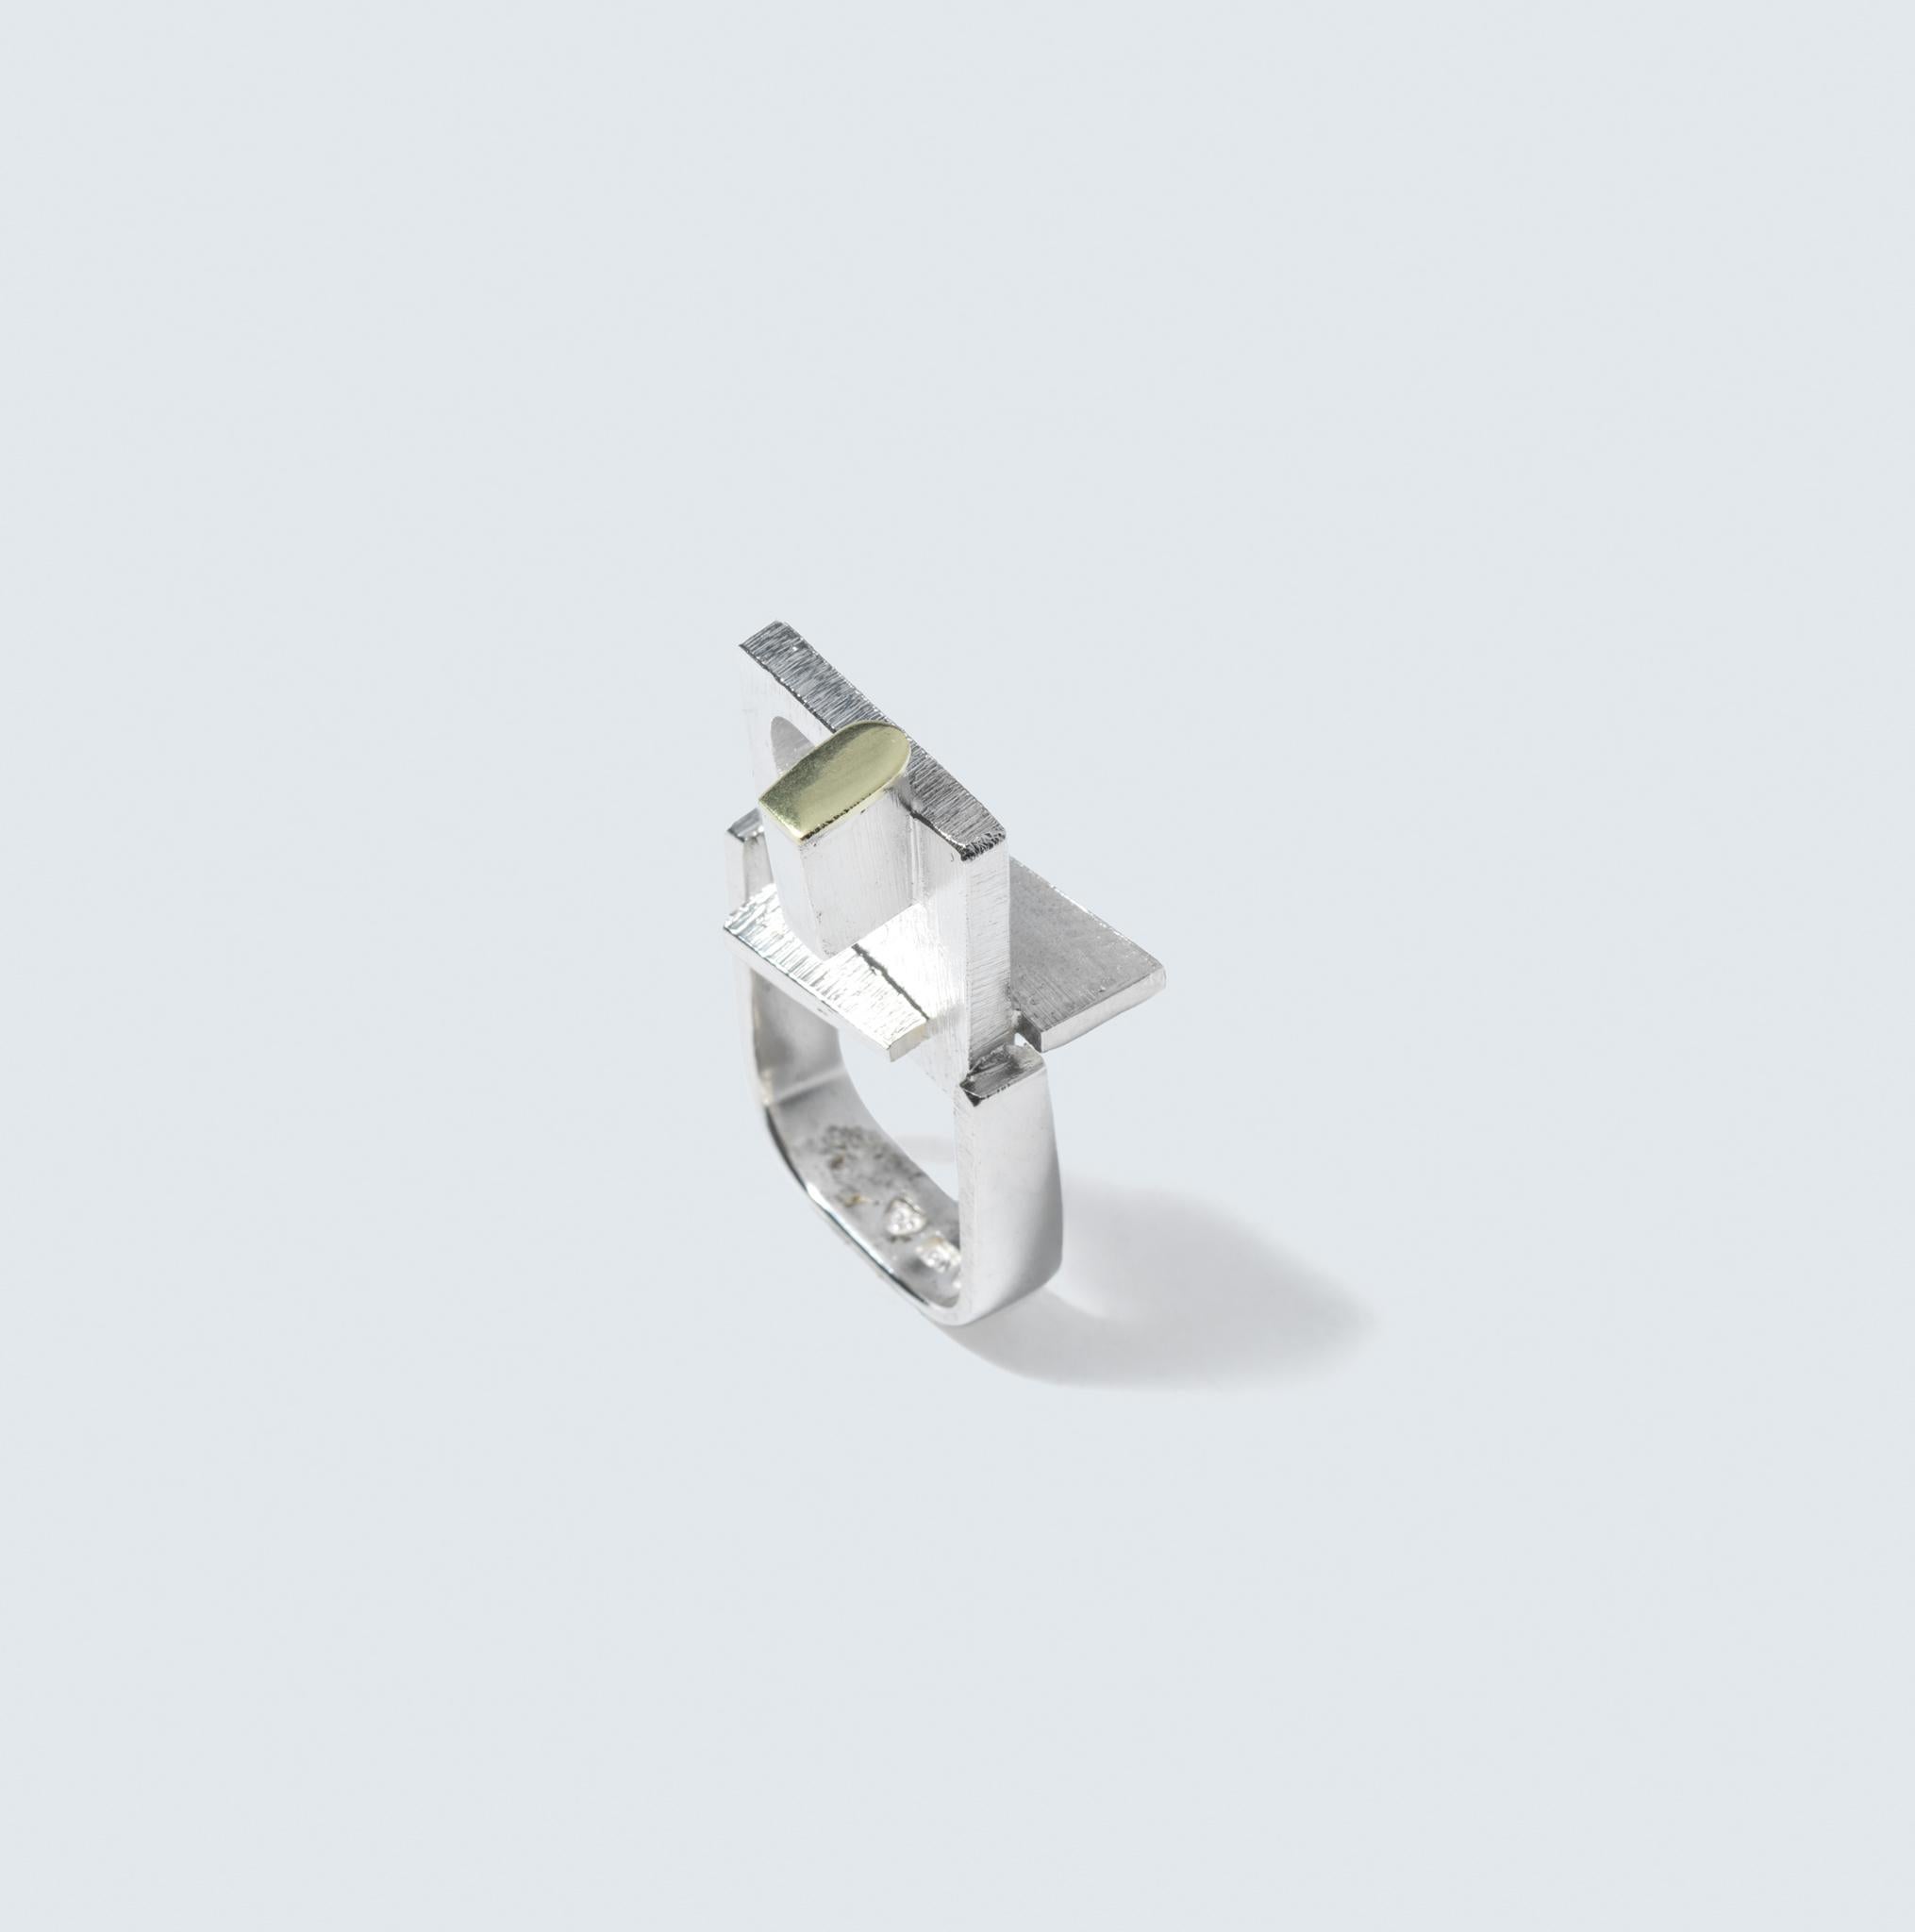 This is a unique ring that blends silver and 18 karat gold in an industrial design. The band of the ring is square in shape, giving it a modern and structured look. At the center, it features an assembly of various geometric shapes, adding to the